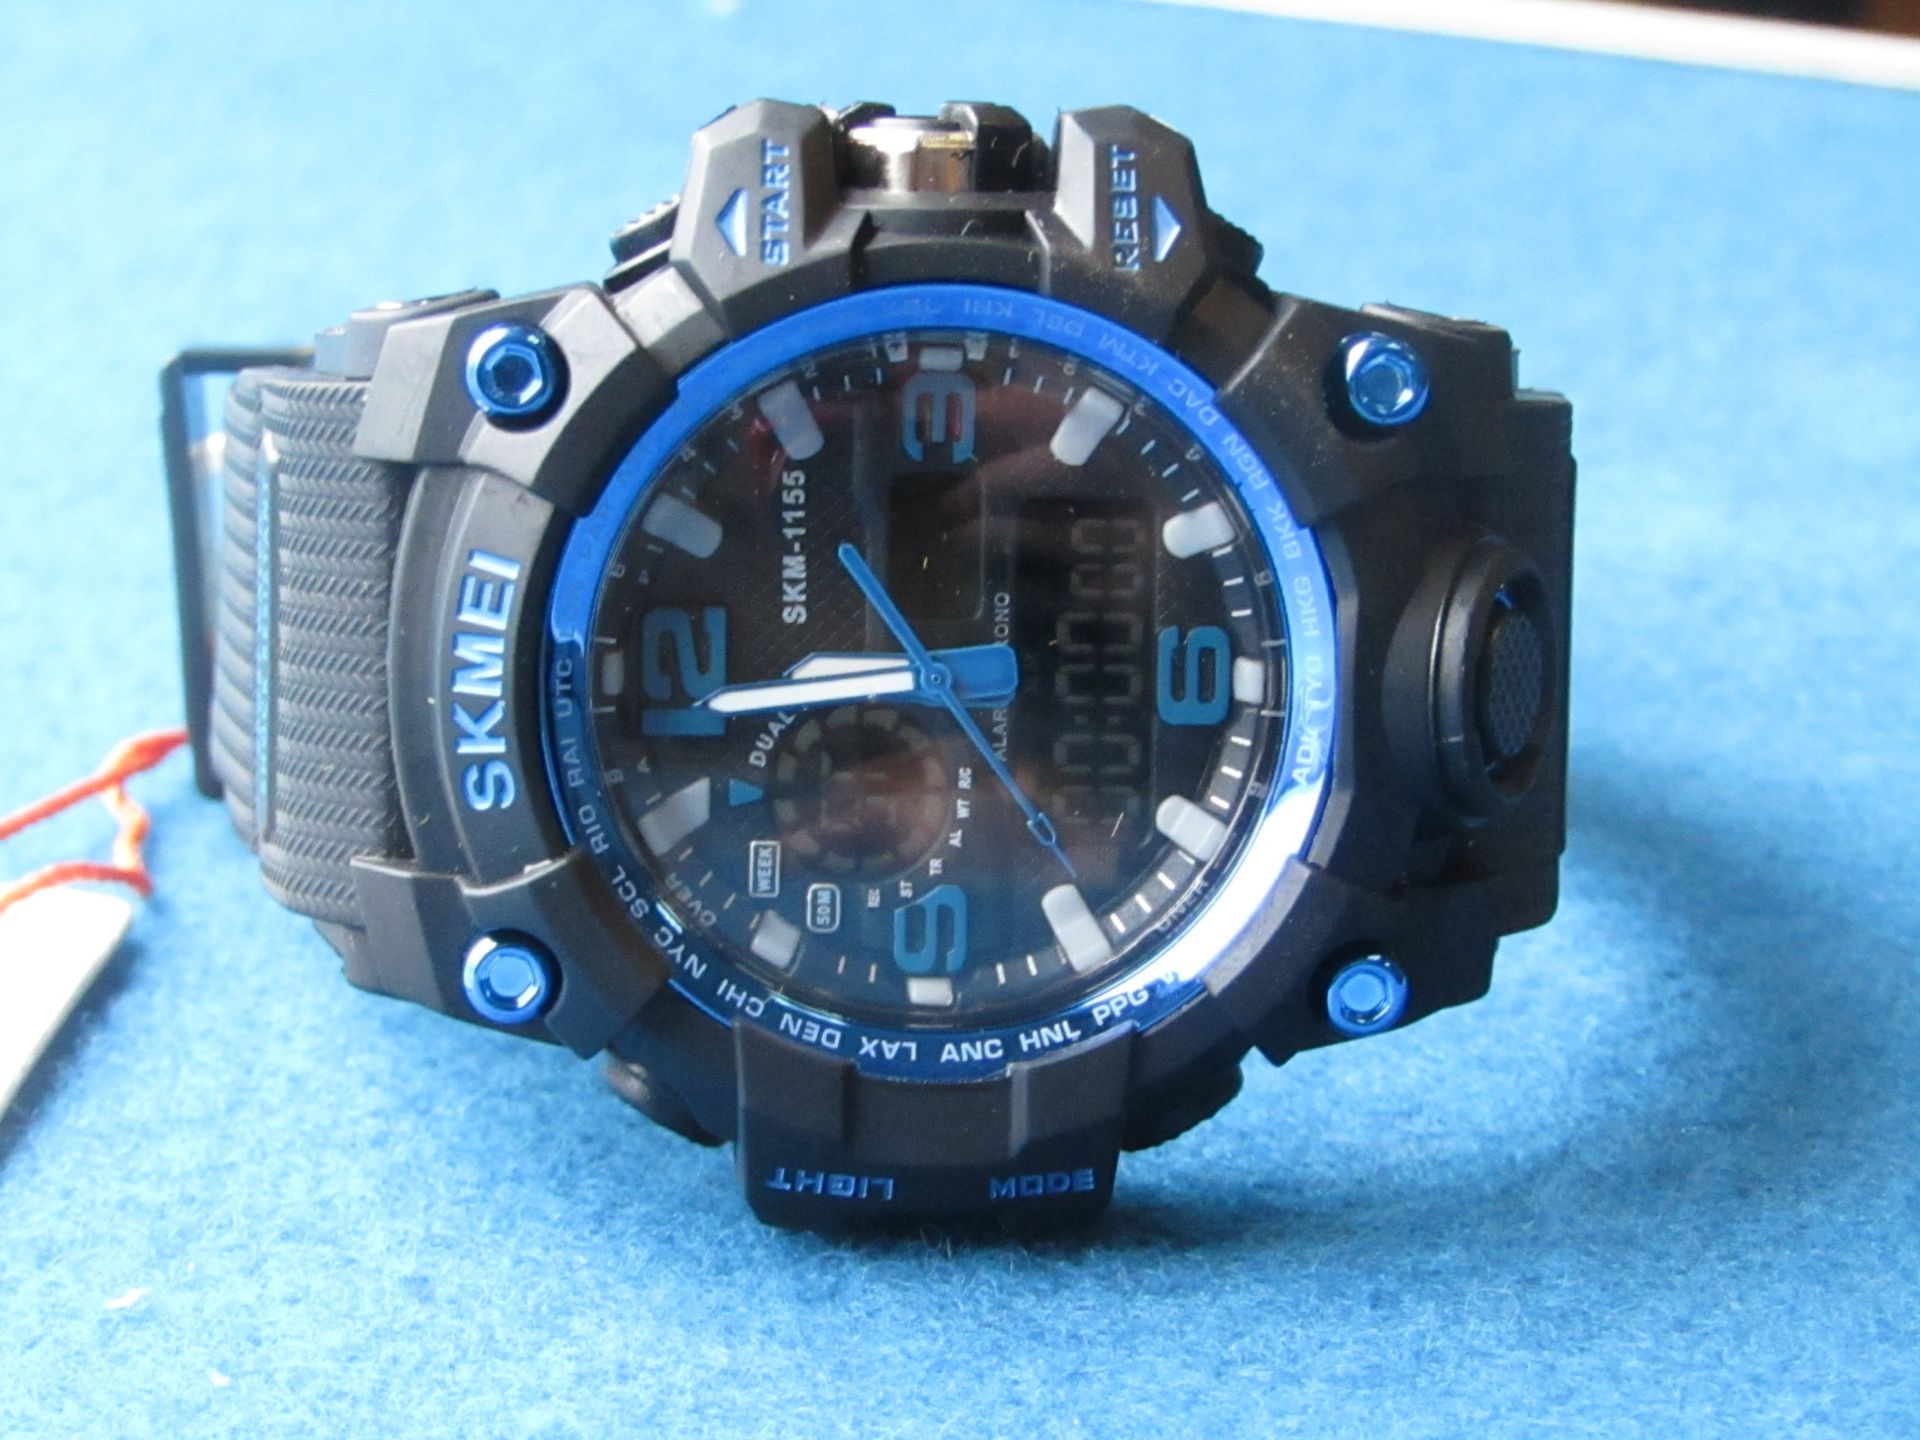 Coly Skmei Mens Analogue Digital Mulitfunctional Black / Blue Watch. Some may require battery as